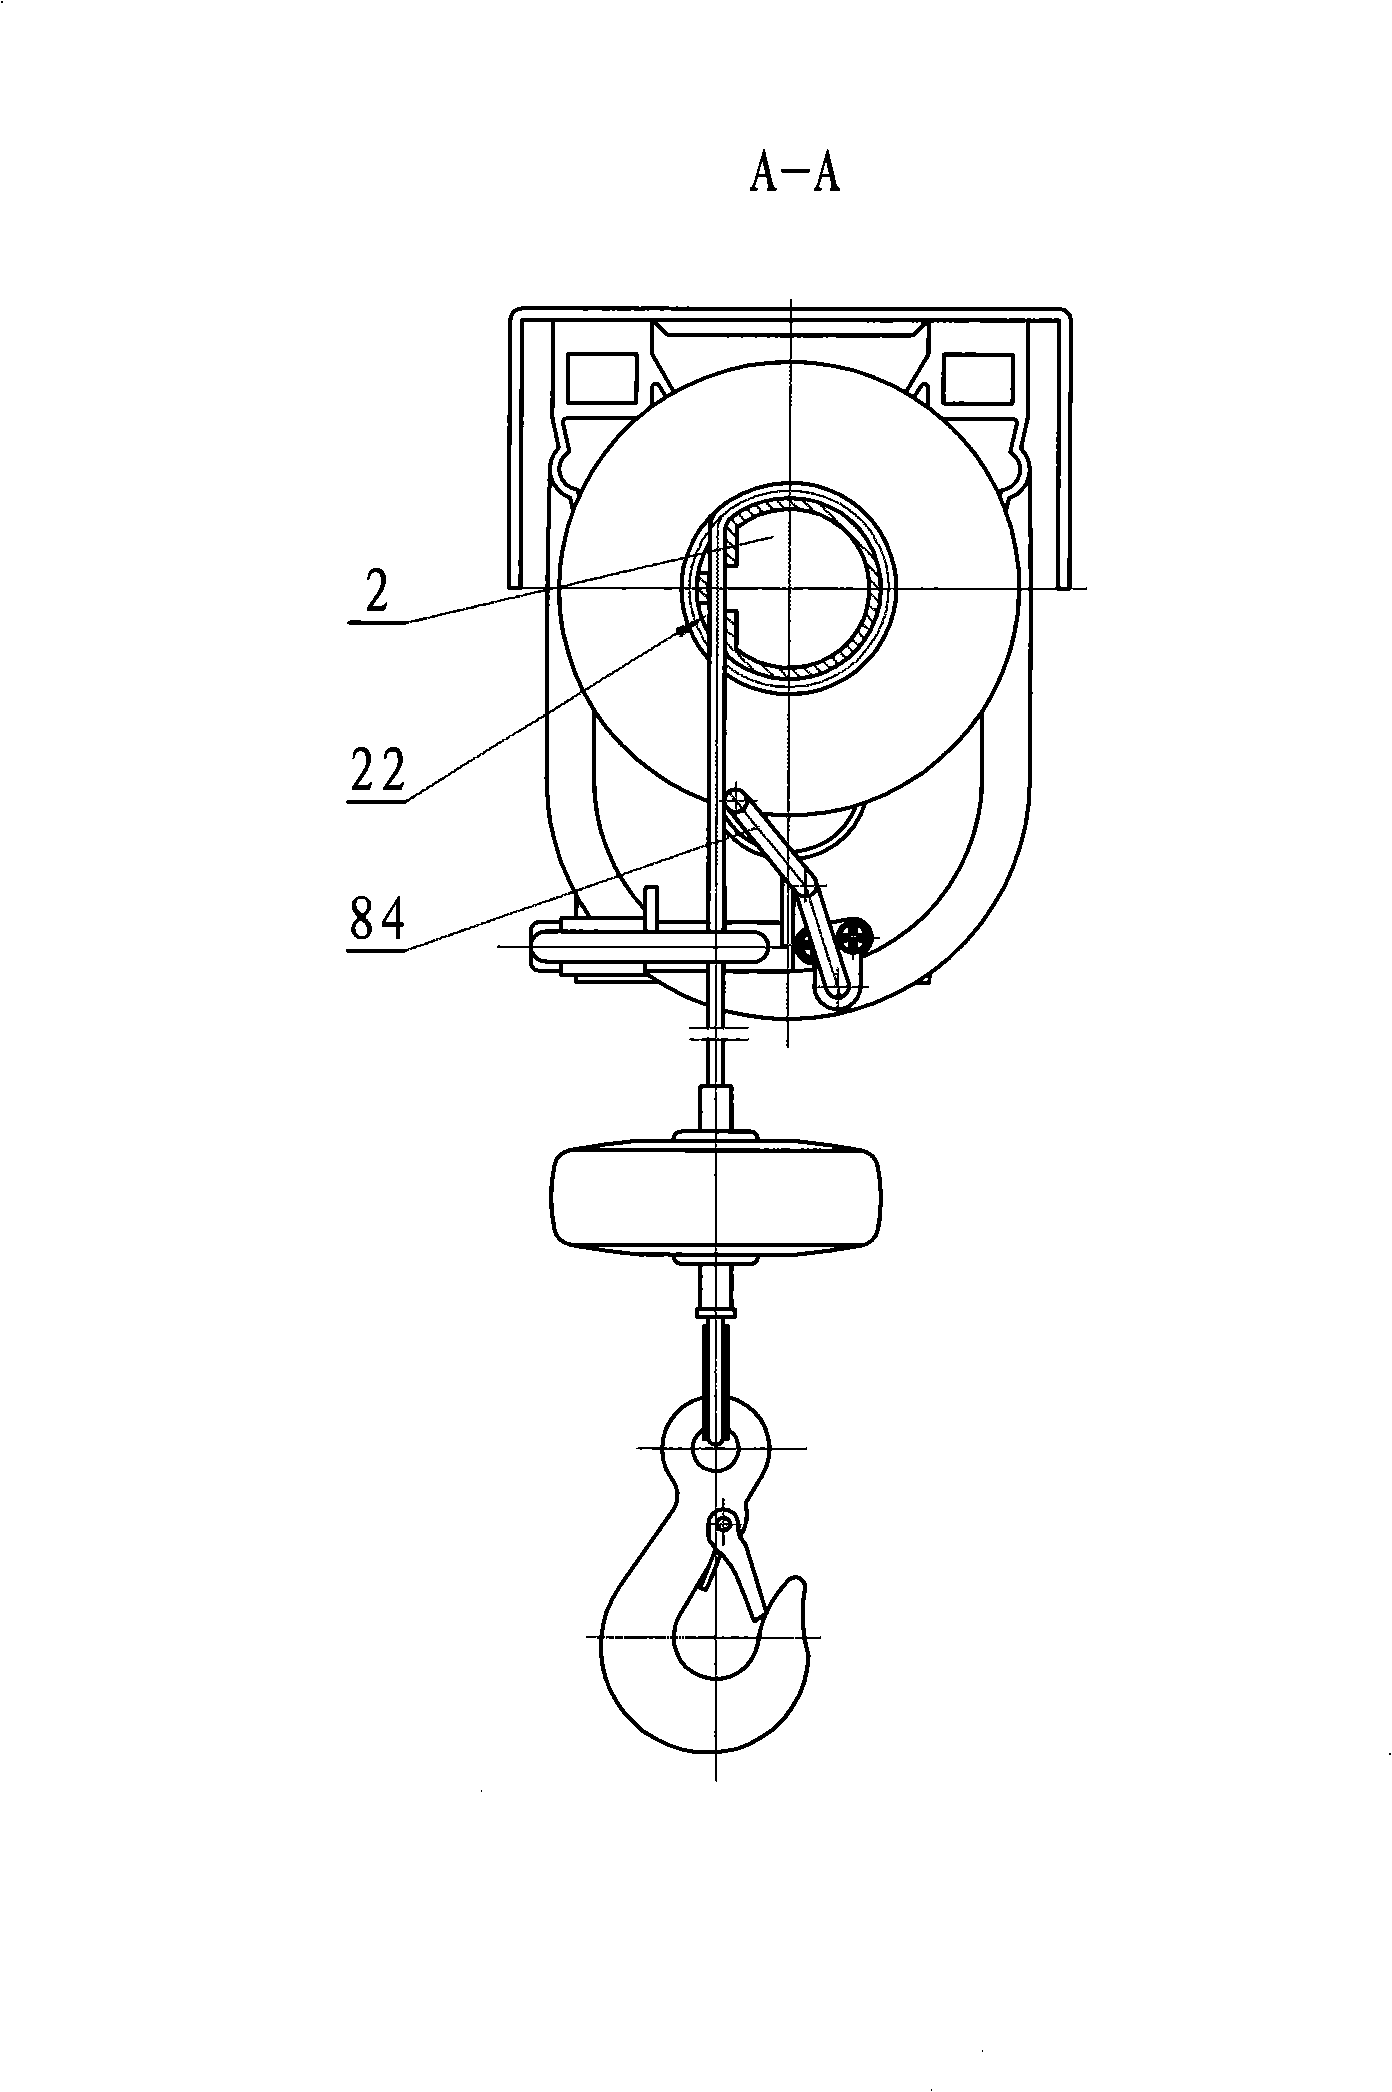 Single-phase electric gourd with lower caging device